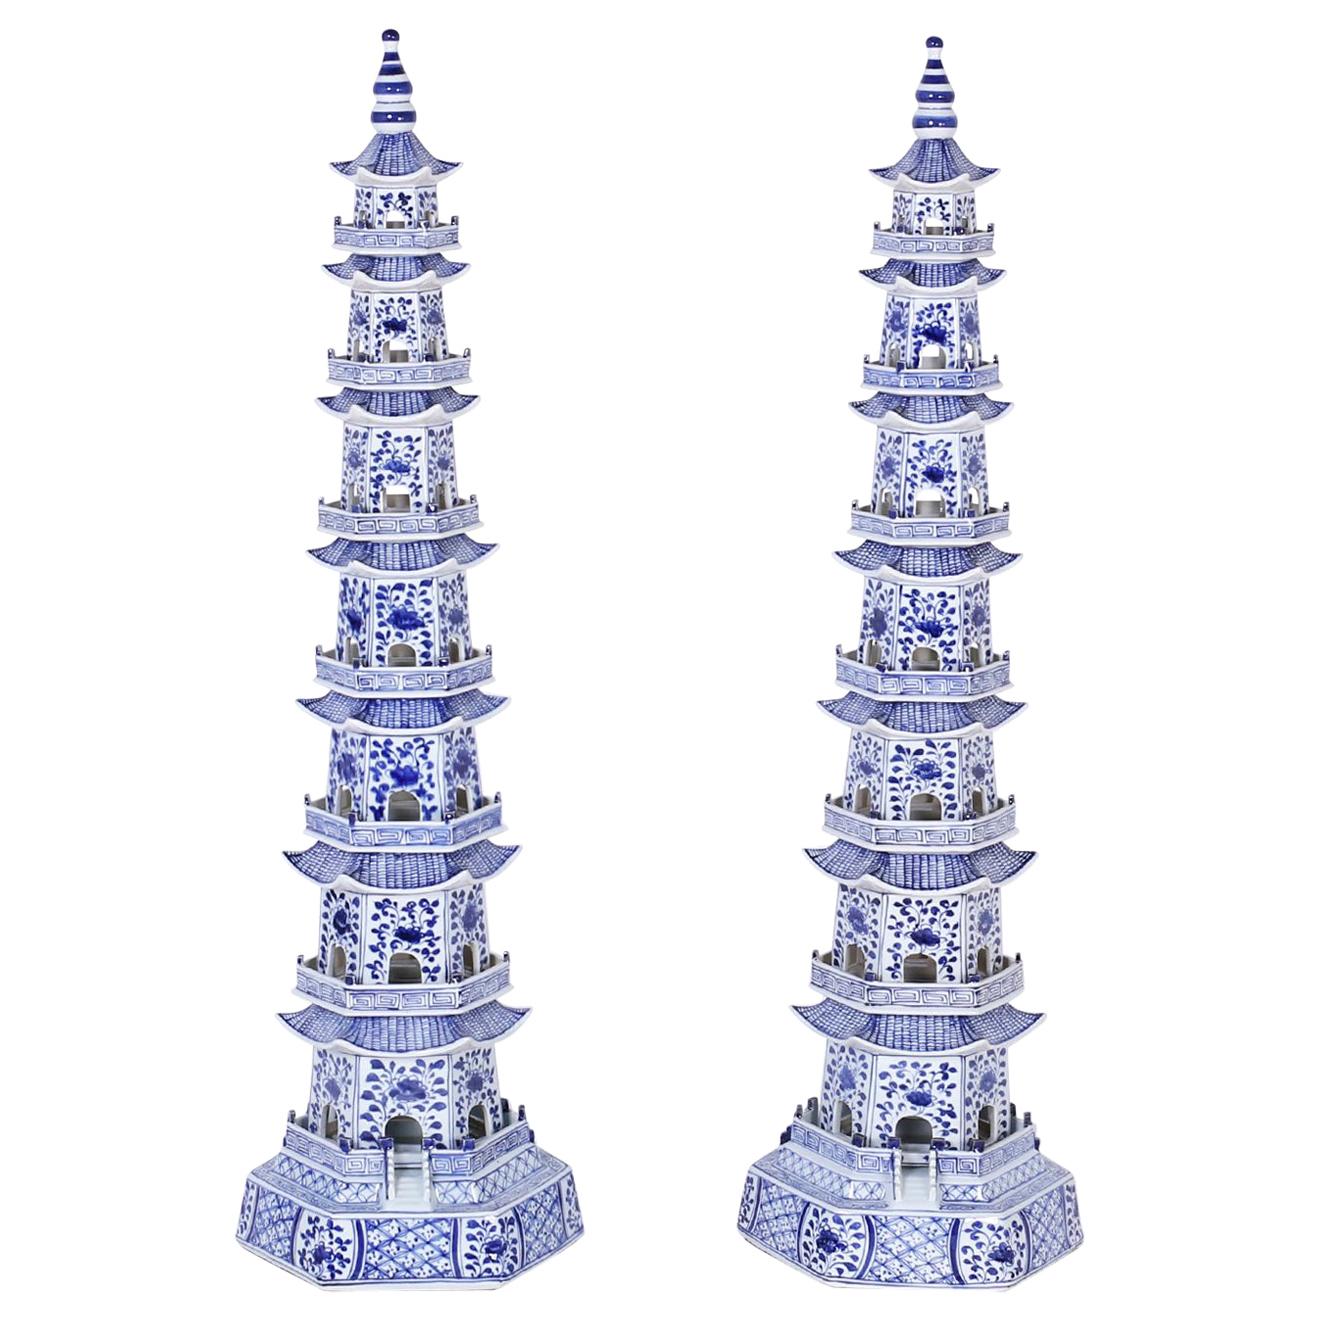 Pair of Chinese Blue and White Porcelain Pagodas